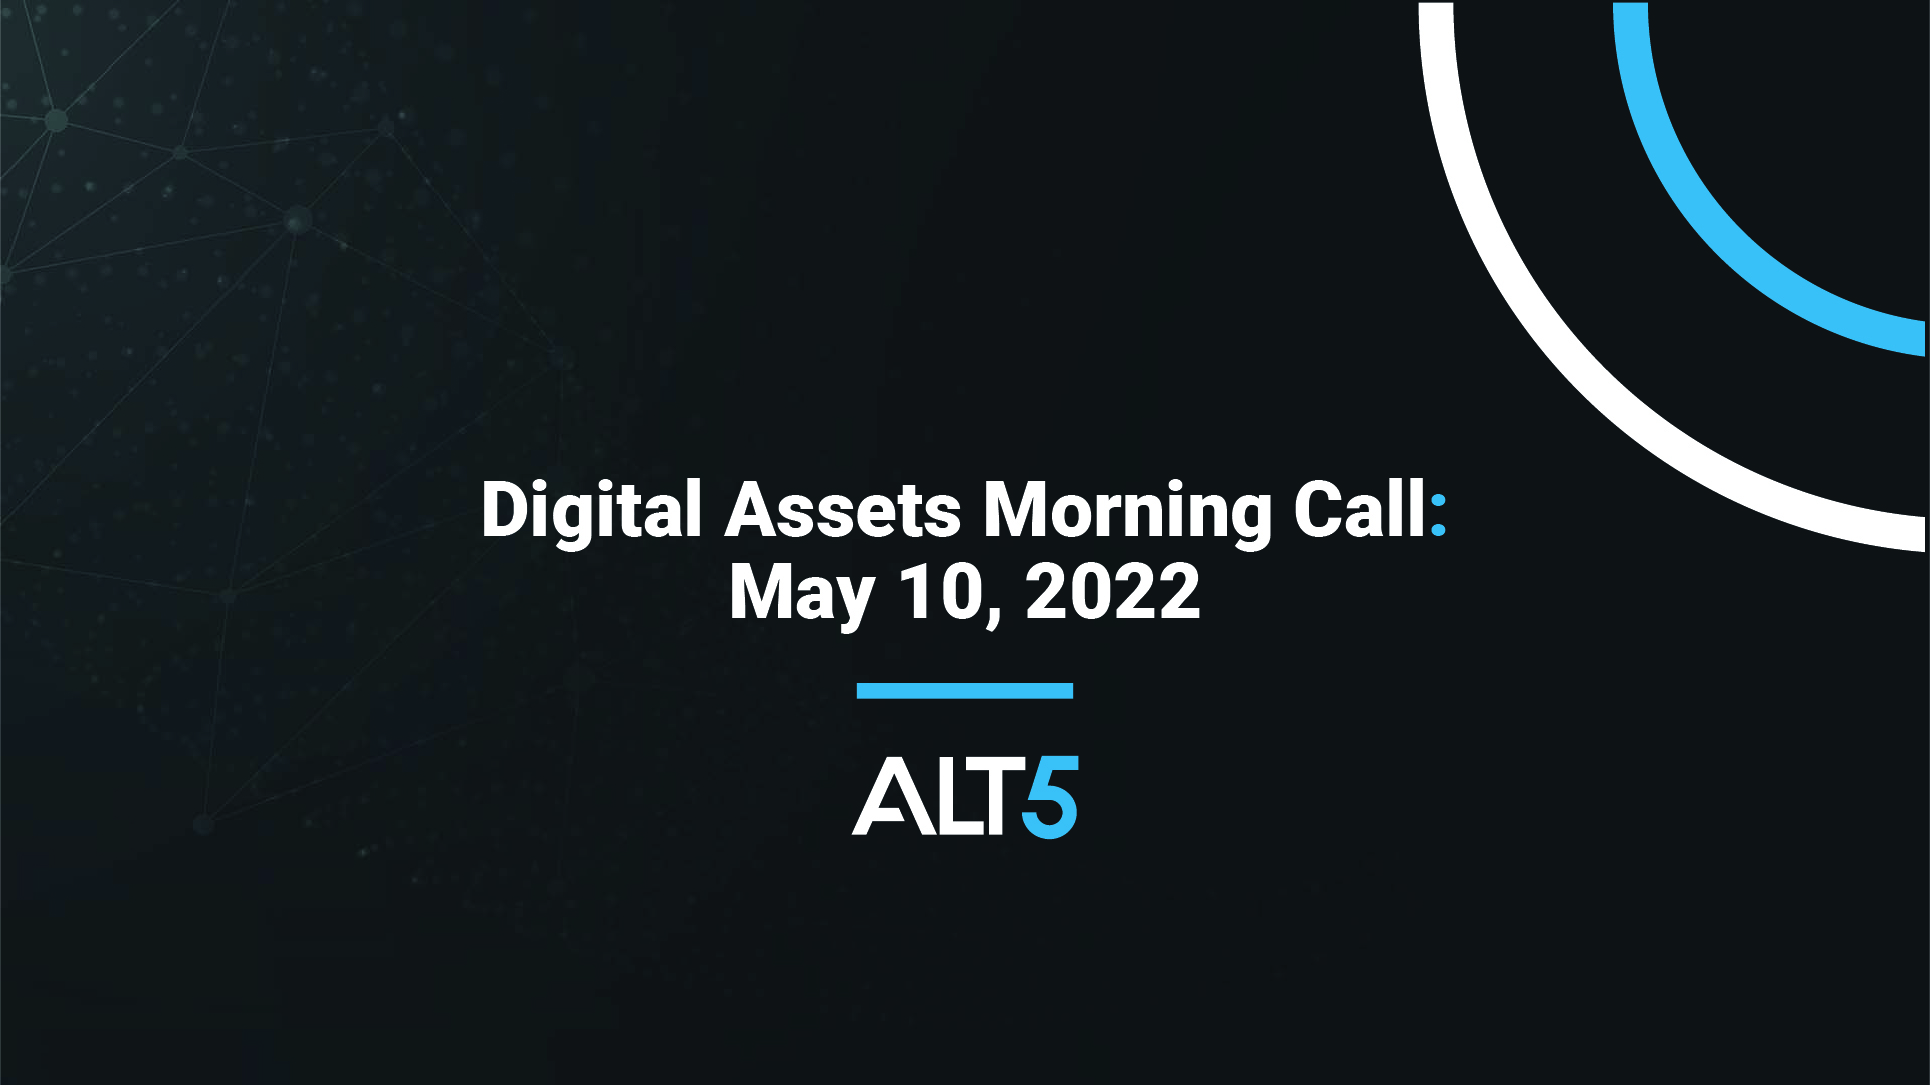 Digital Assets Morning Call: May 10 2022 - Selling pressure in major crypto assets eases for now, but not before registering severe declines